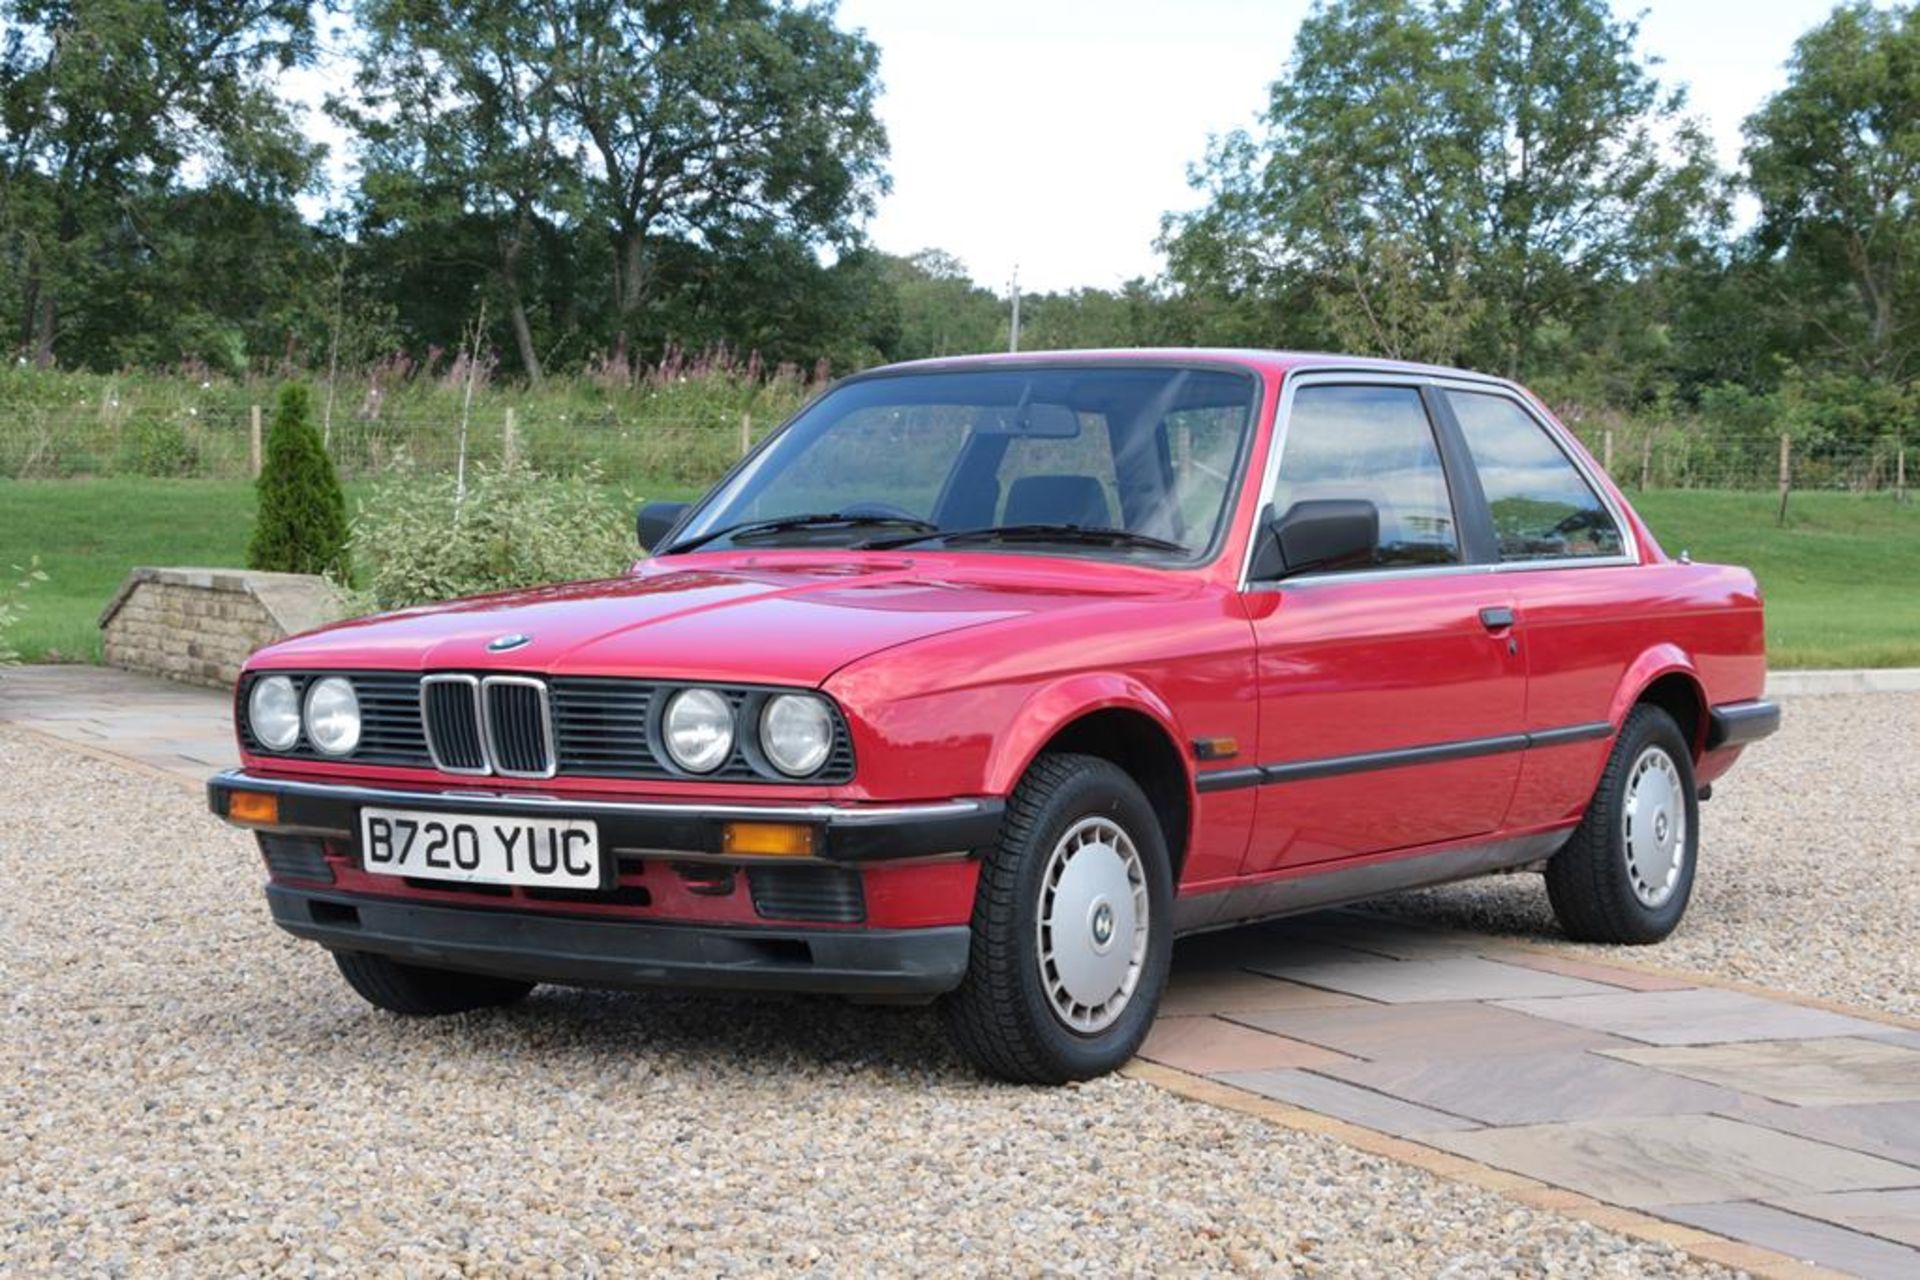 1985 BMW 320I Automatic Registration number: B720 YUC Date of first registration: 15/03/1985 VIN